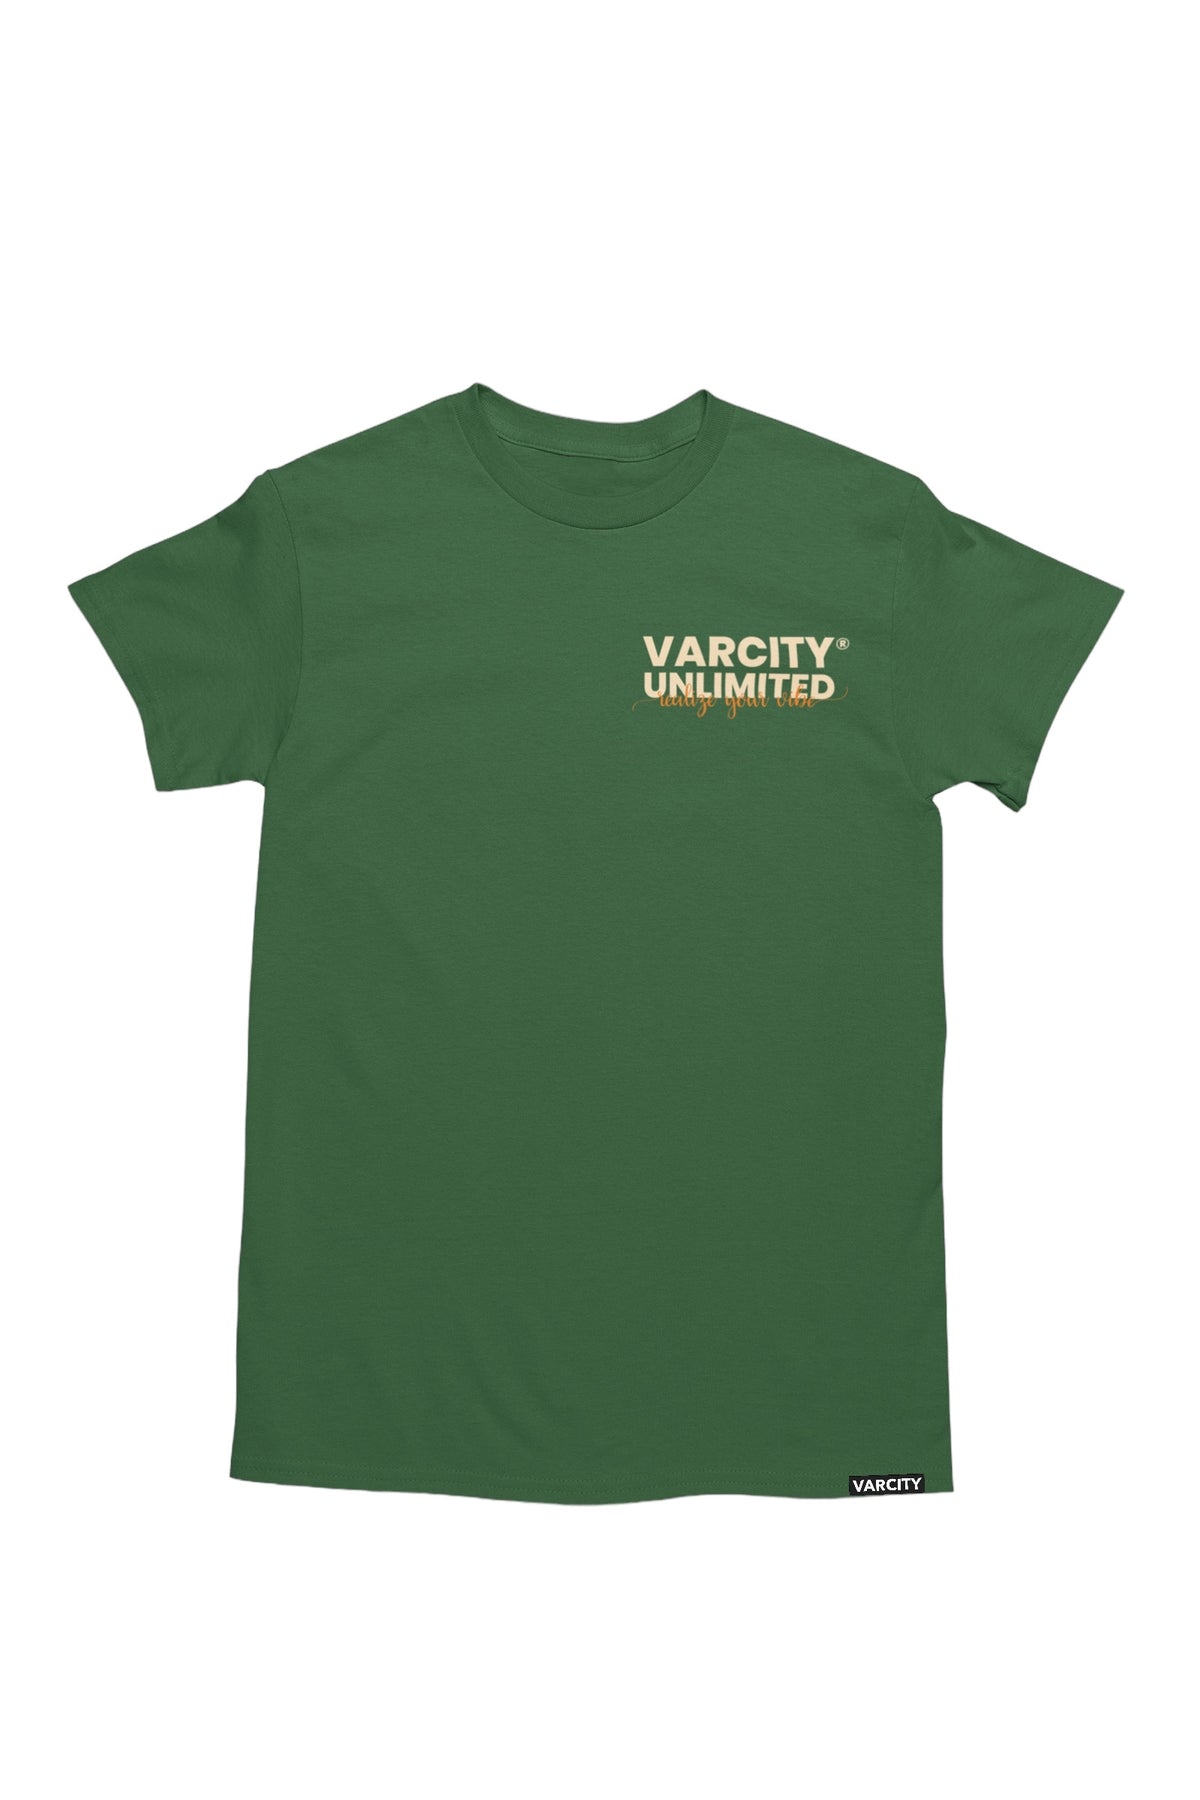 Varcity ® Unlimited Realize Your Vibe T Shirt Forest